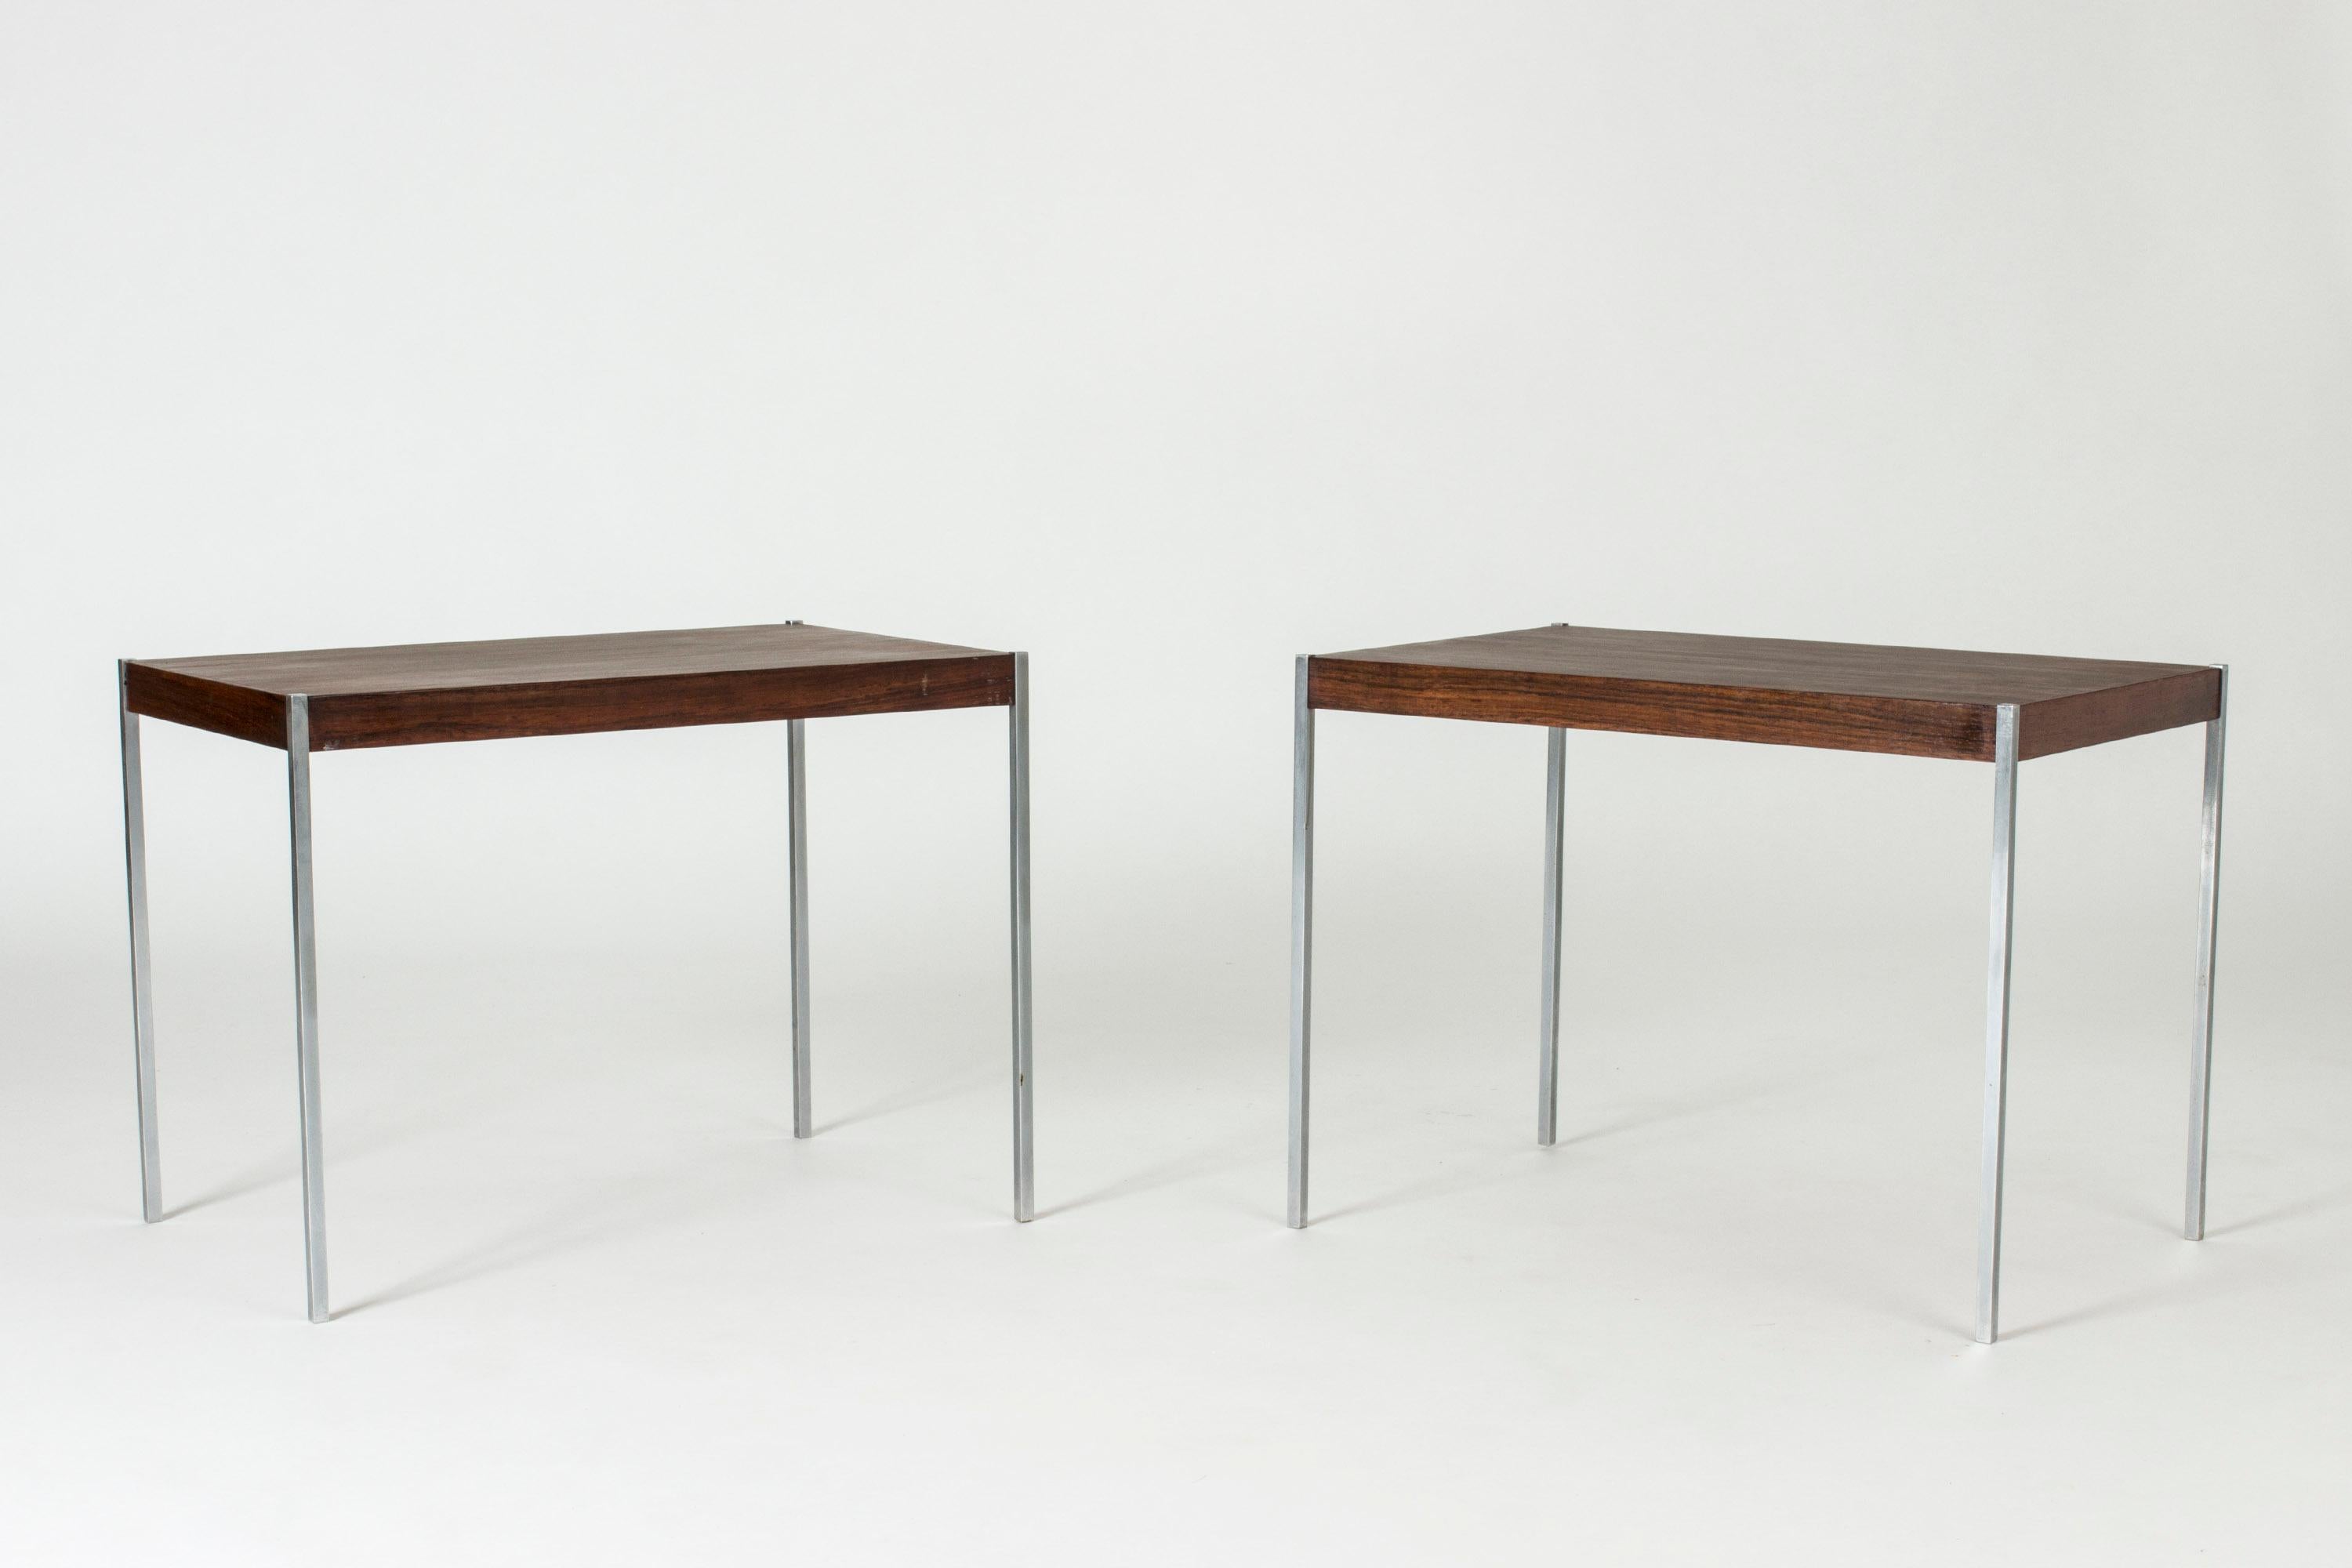 Pair of cool side tables by Uno and Östen Kristiansson. Sleek, square steel legs fitted neatly into the rosewood table tops.